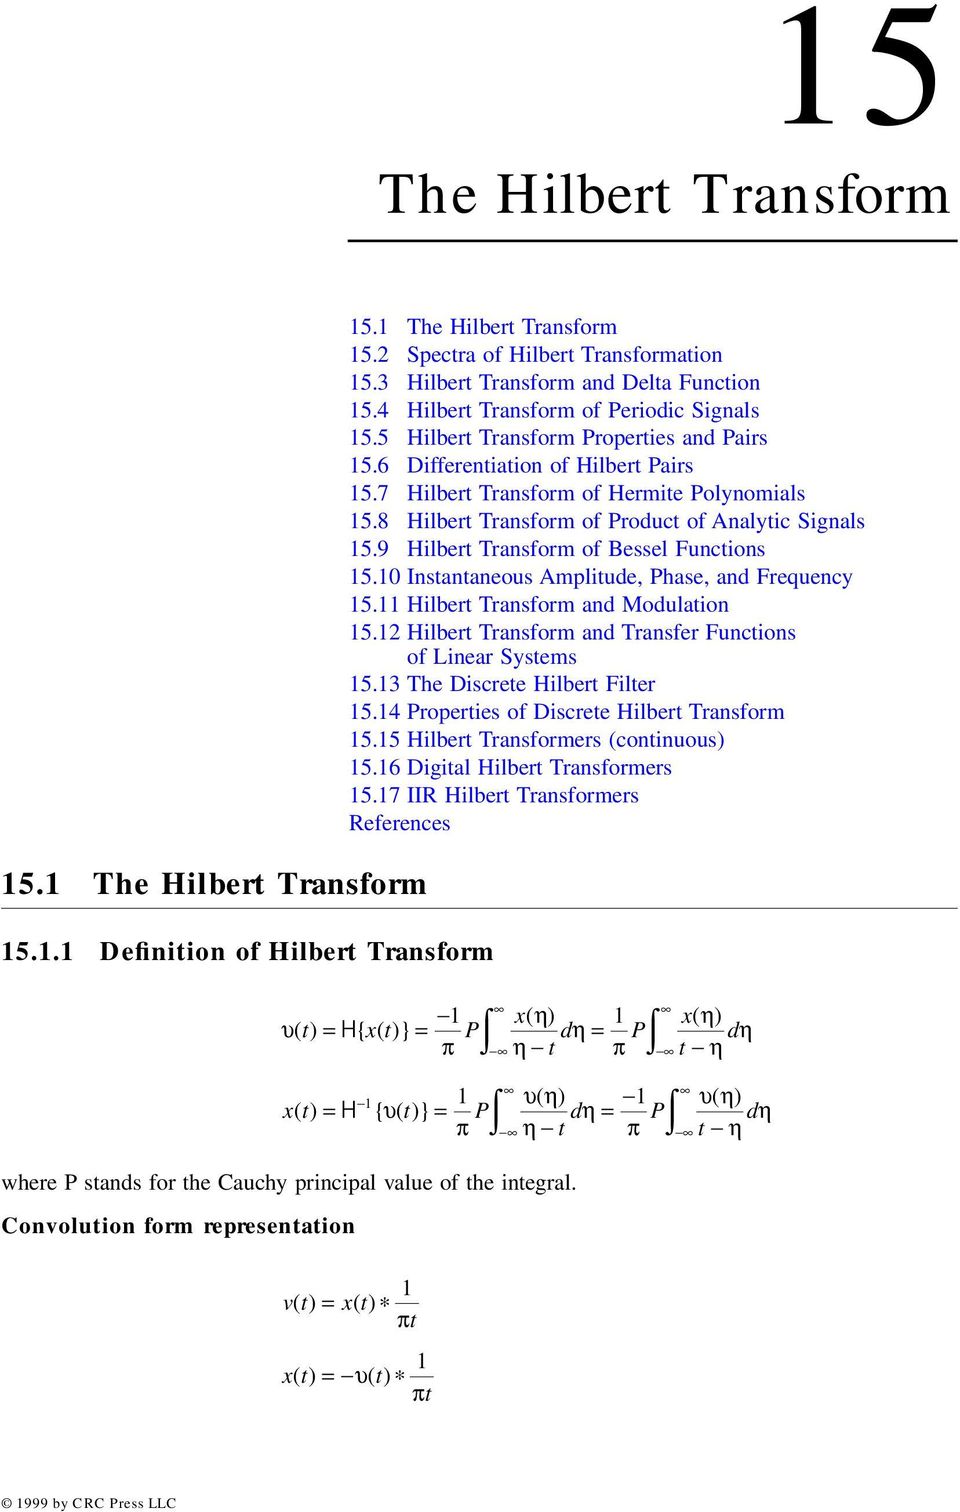 8 Hilber Trasform of Produc of Aalyic Sigals 5.9 Hilber Trasform of Bessel Fucios 5. Isaaeous Ampliude, Phase, ad Frequecy 5. Hilber Trasform ad Modulaio 5.